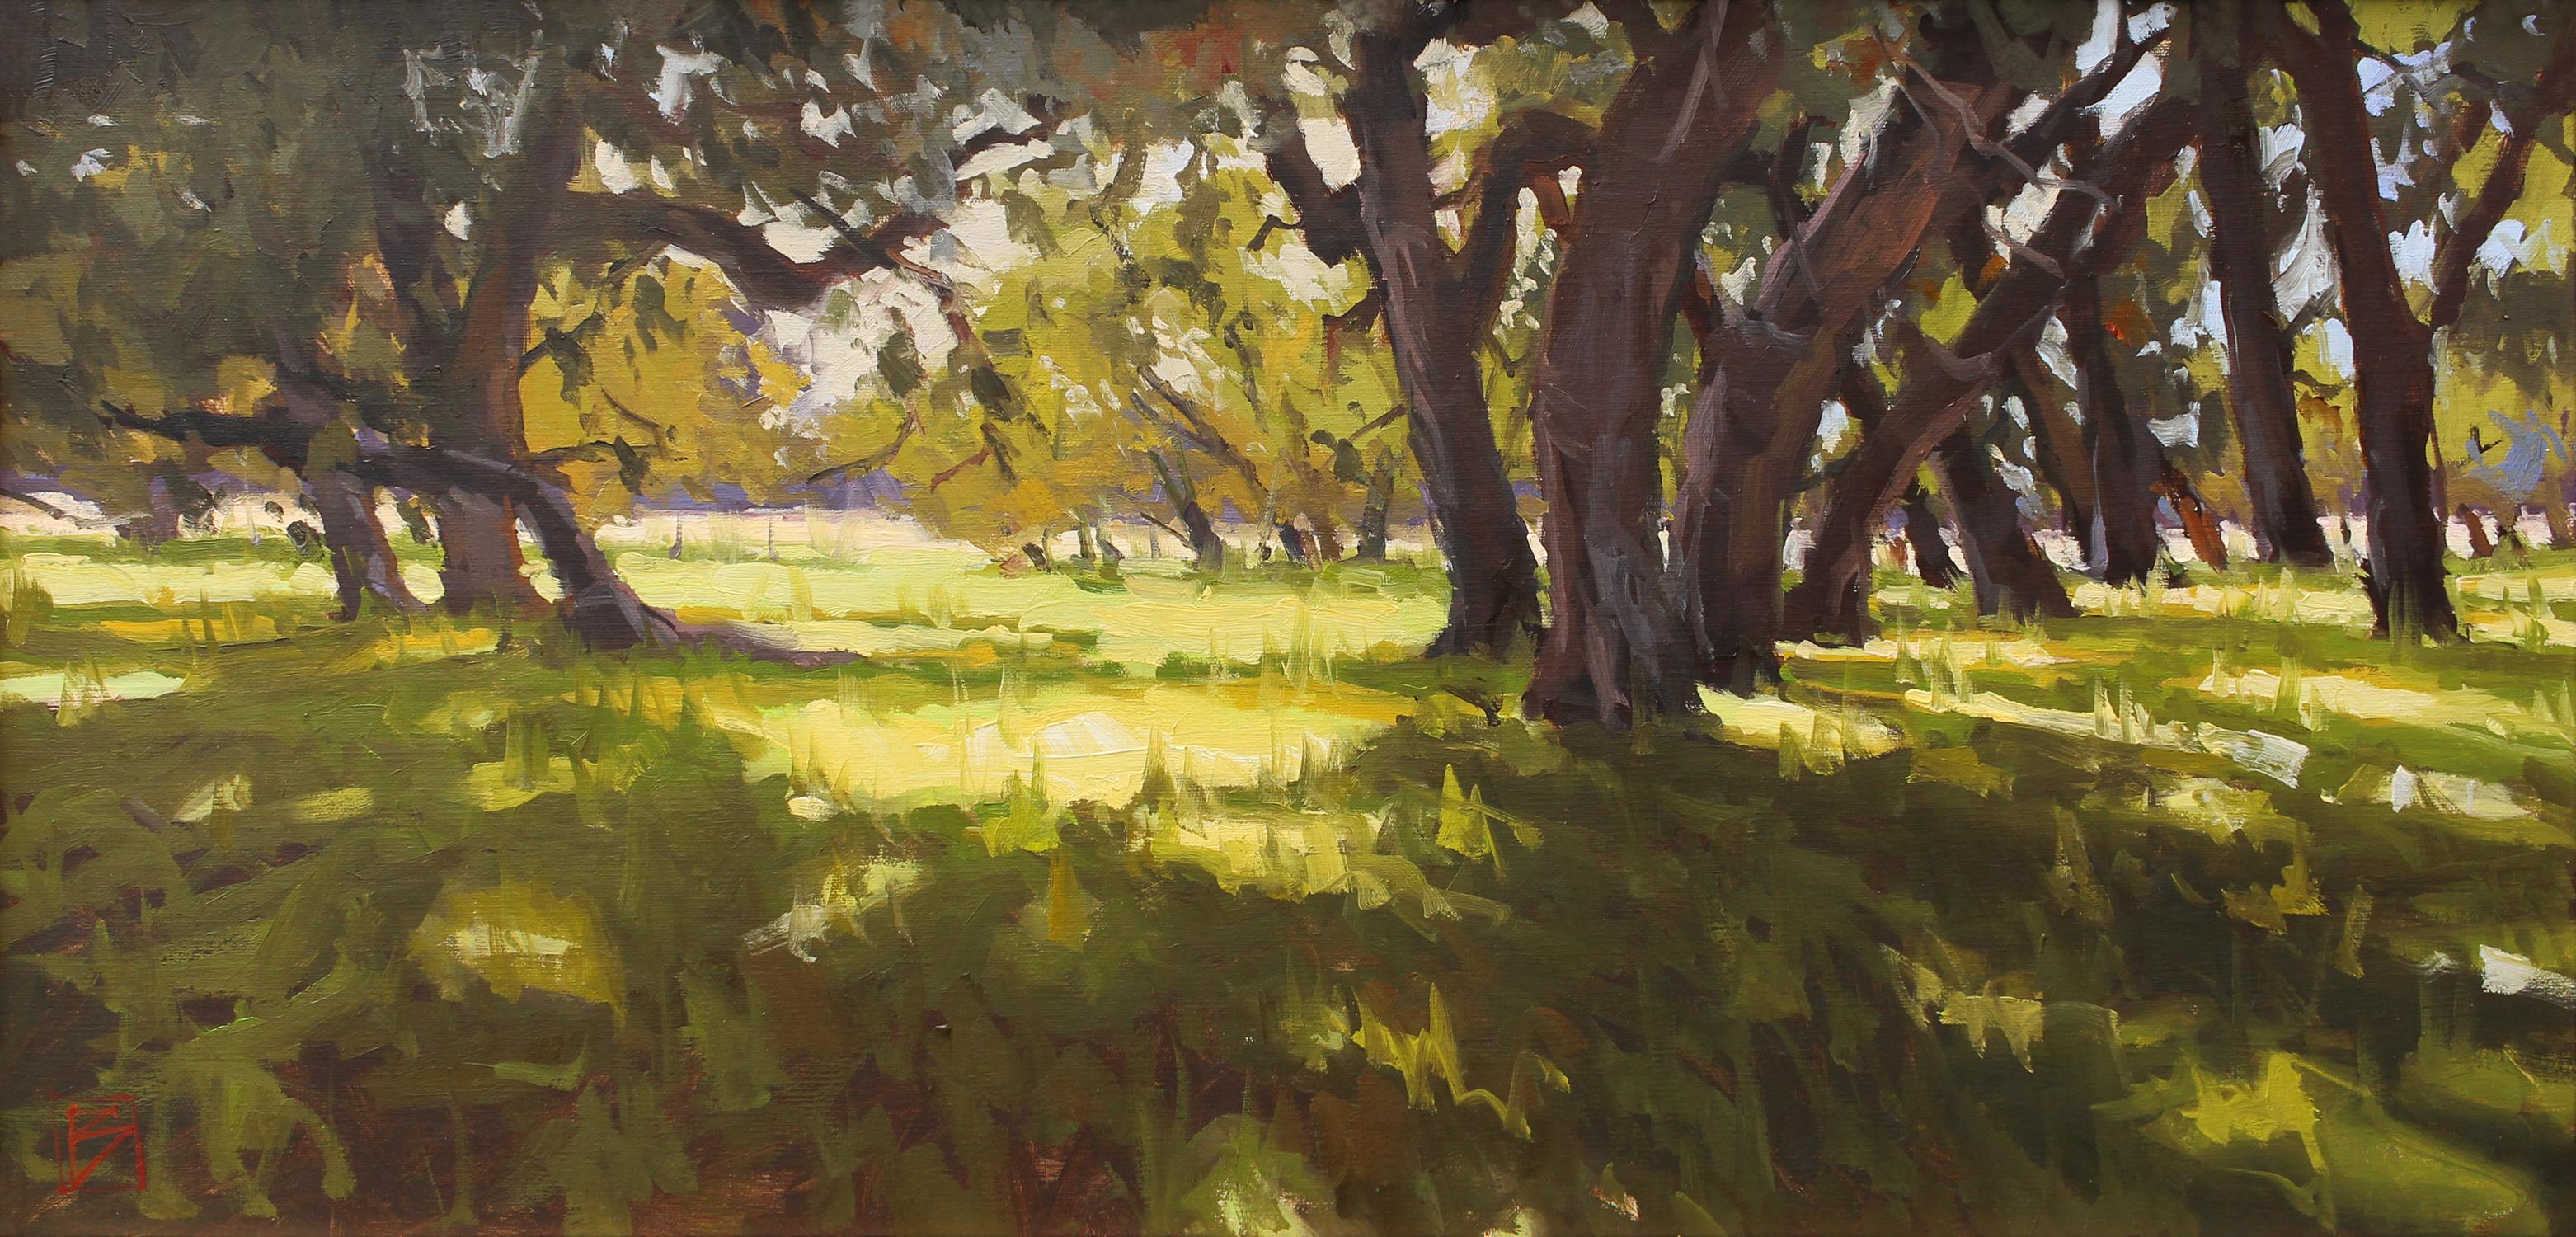 "Between the Oaks" is a plein air landscape painting featuring green, yellow, brown and blue hues.
David Boyd is inspired by the work of Edward Hopper, Andrew Wyeth and Winslow Homer.

David Boyd is a plein air artist who paints the Southeast’s